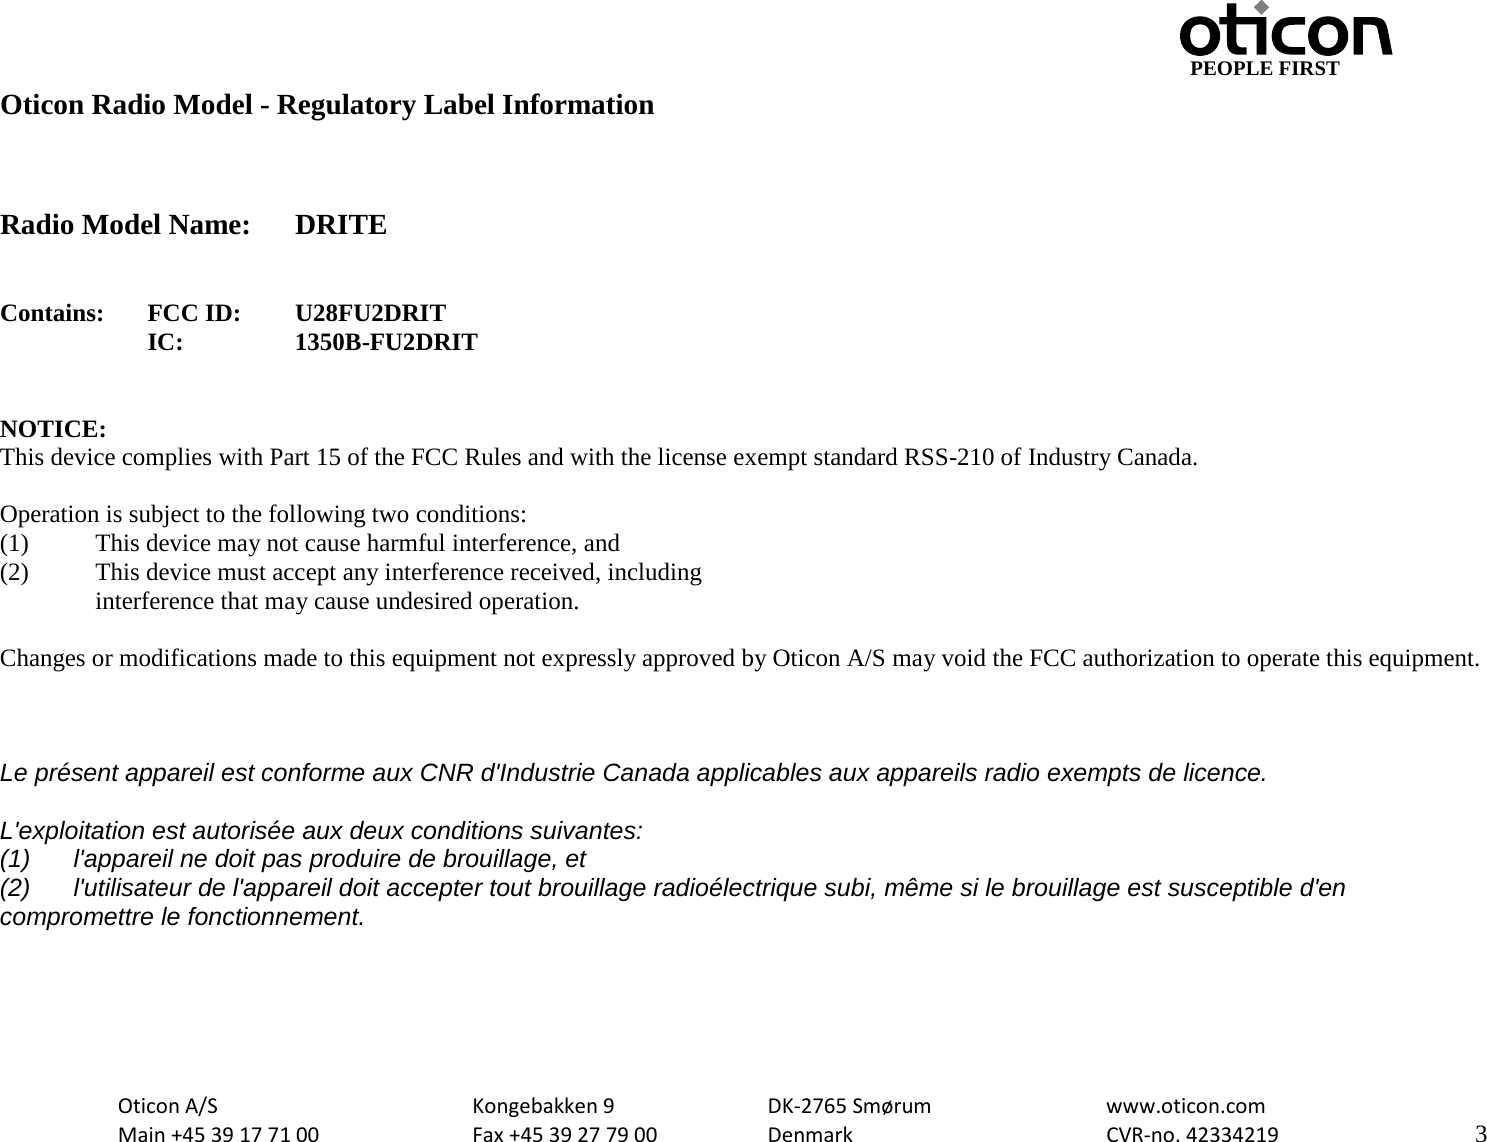                                                     PEOPLE FIRST Oticon Radio Model - Regulatory Label Information    Radio Model Name: DRITE   Contains:  FCC ID: U28FU2DRIT IC:    1350B-FU2DRIT   NOTICE: This device complies with Part 15 of the FCC Rules and with the license exempt standard RSS-210 of Industry Canada.  Operation is subject to the following two conditions: (1)   This device may not cause harmful interference, and (2)  This device must accept any interference received, including  interference that may cause undesired operation.  Changes or modifications made to this equipment not expressly approved by Oticon A/S may void the FCC authorization to operate this equipment.    Le présent appareil est conforme aux CNR d&apos;Industrie Canada applicables aux appareils radio exempts de licence.  L&apos;exploitation est autorisée aux deux conditions suivantes: (1) l&apos;appareil ne doit pas produire de brouillage, et  (2) l&apos;utilisateur de l&apos;appareil doit accepter tout brouillage radioélectrique subi, même si le brouillage est susceptible d&apos;en compromettre le fonctionnement.     Oticon A/S      Kongebakken 9   DK-2765 Smørum   www.oticon.com  Main +45 39 17 71 00    Fax +45 39 27 79 00    Denmark    CVR-no. 42334219      3  